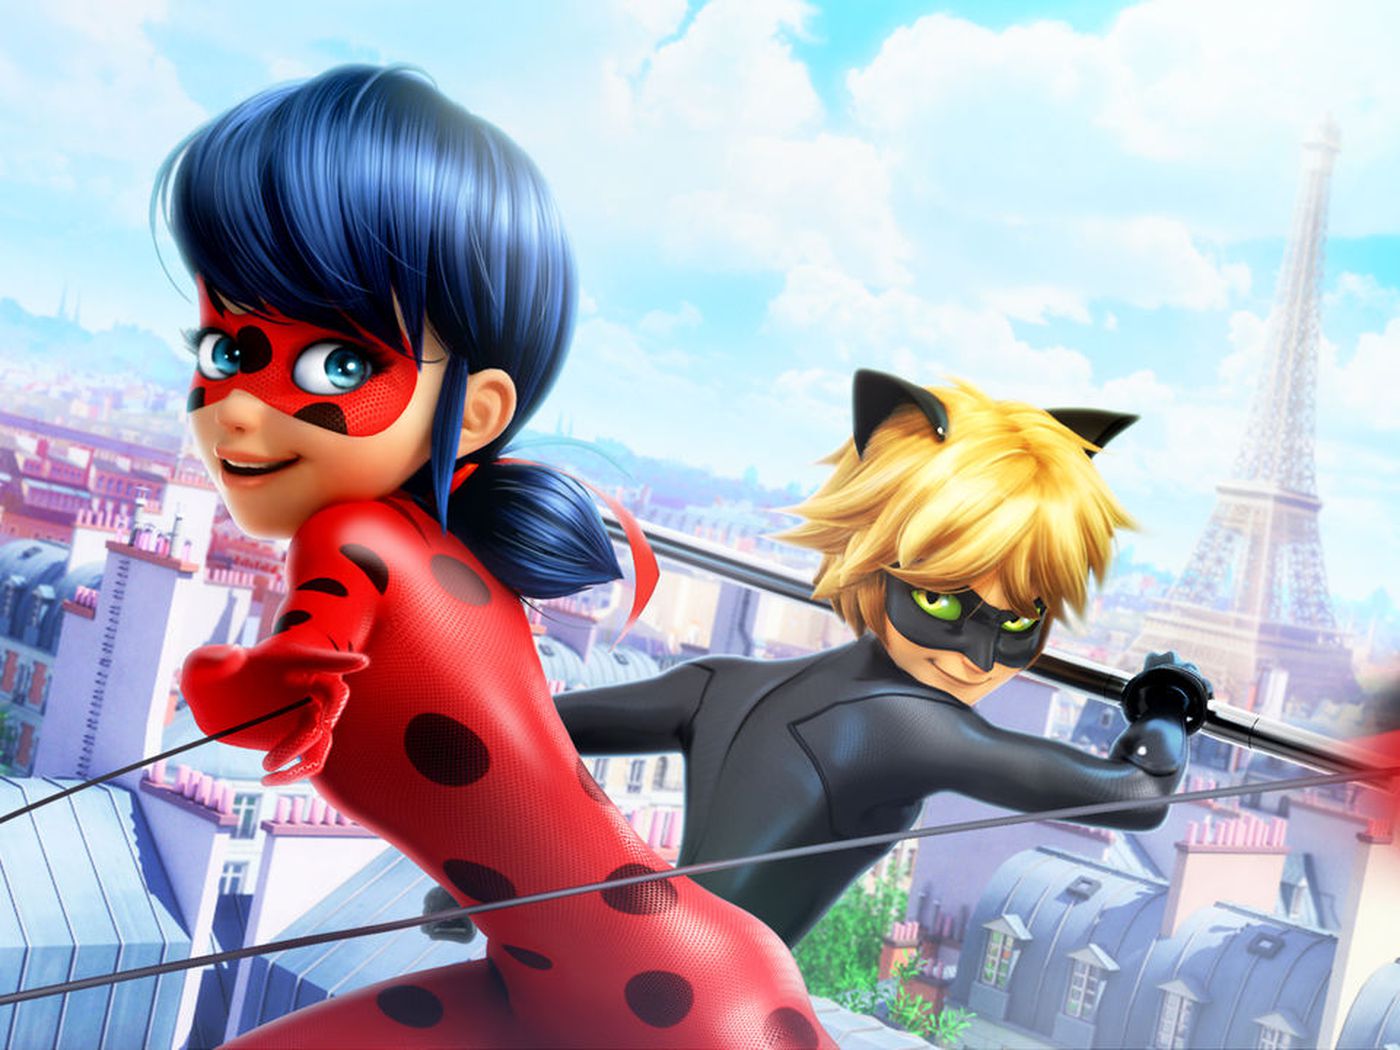 Miraculous Ladybug: Will Marinette and Adrien End Up Together?